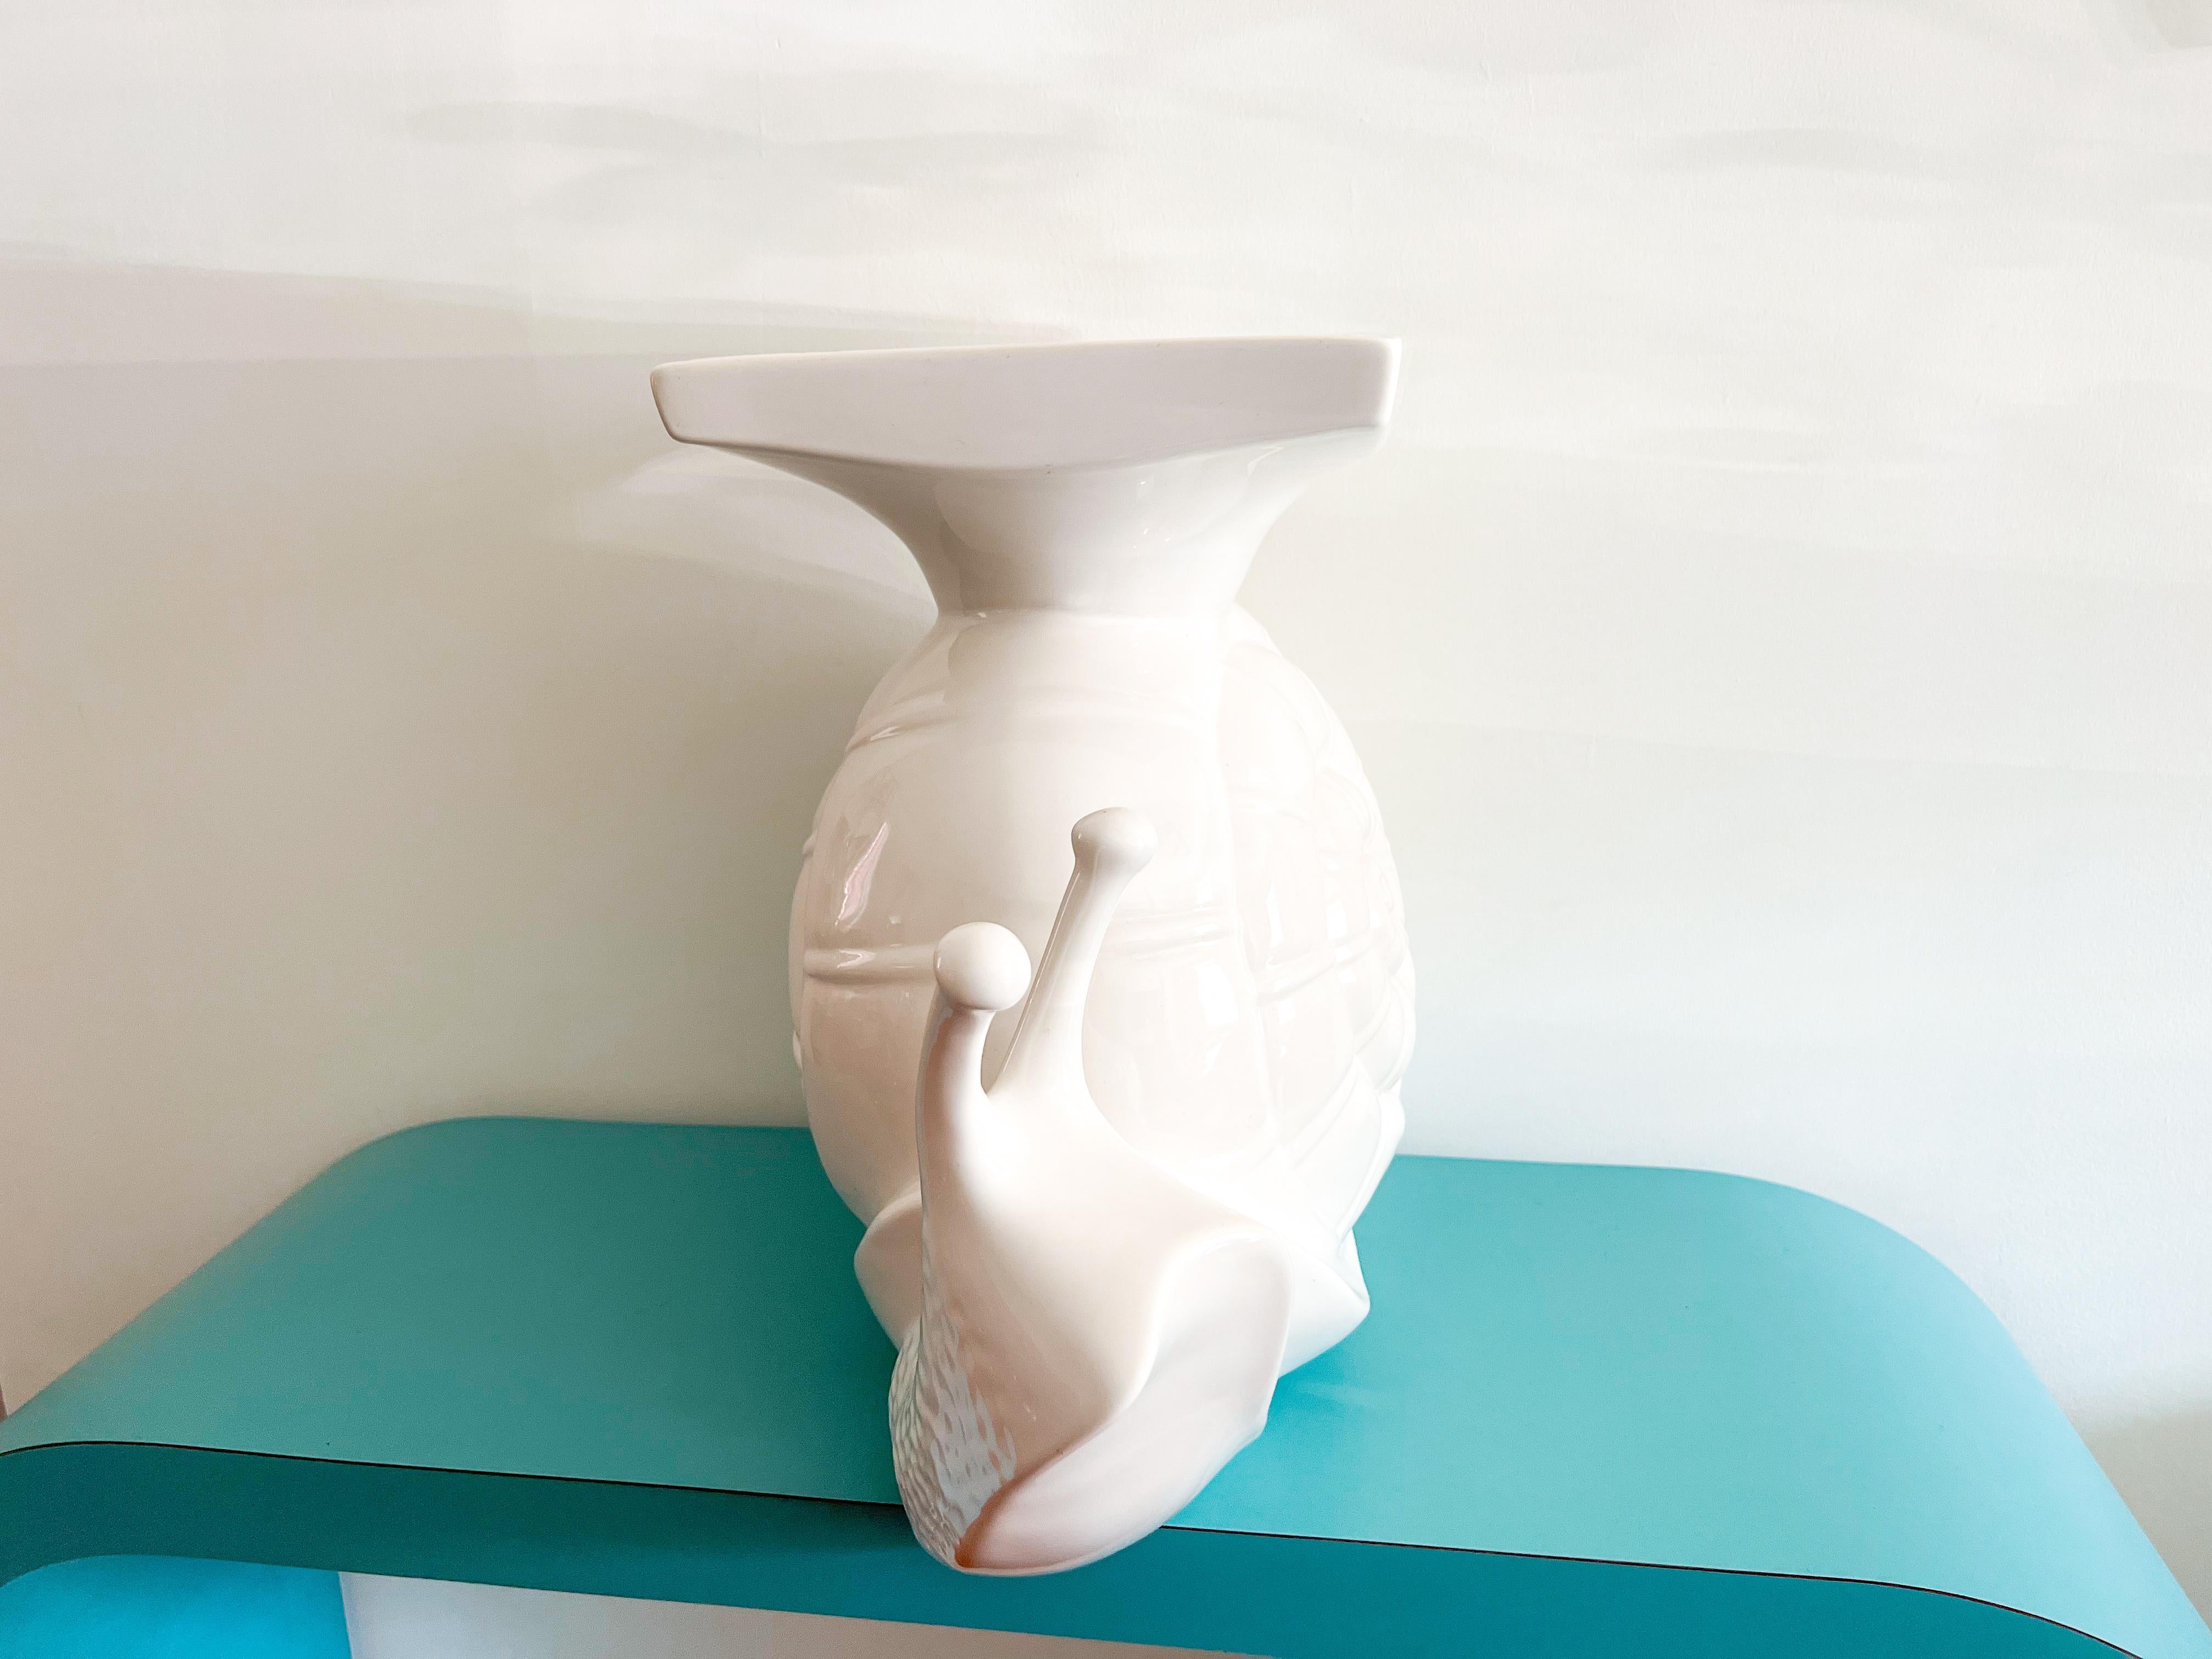 A distinctive garden table/stand made of white glazed ceramic, featuring a unique and exceptional snail design. 
This item is an ideal addition for those seeking a statement piece. It boasts remarkable sturdiness and can accommodate large plants